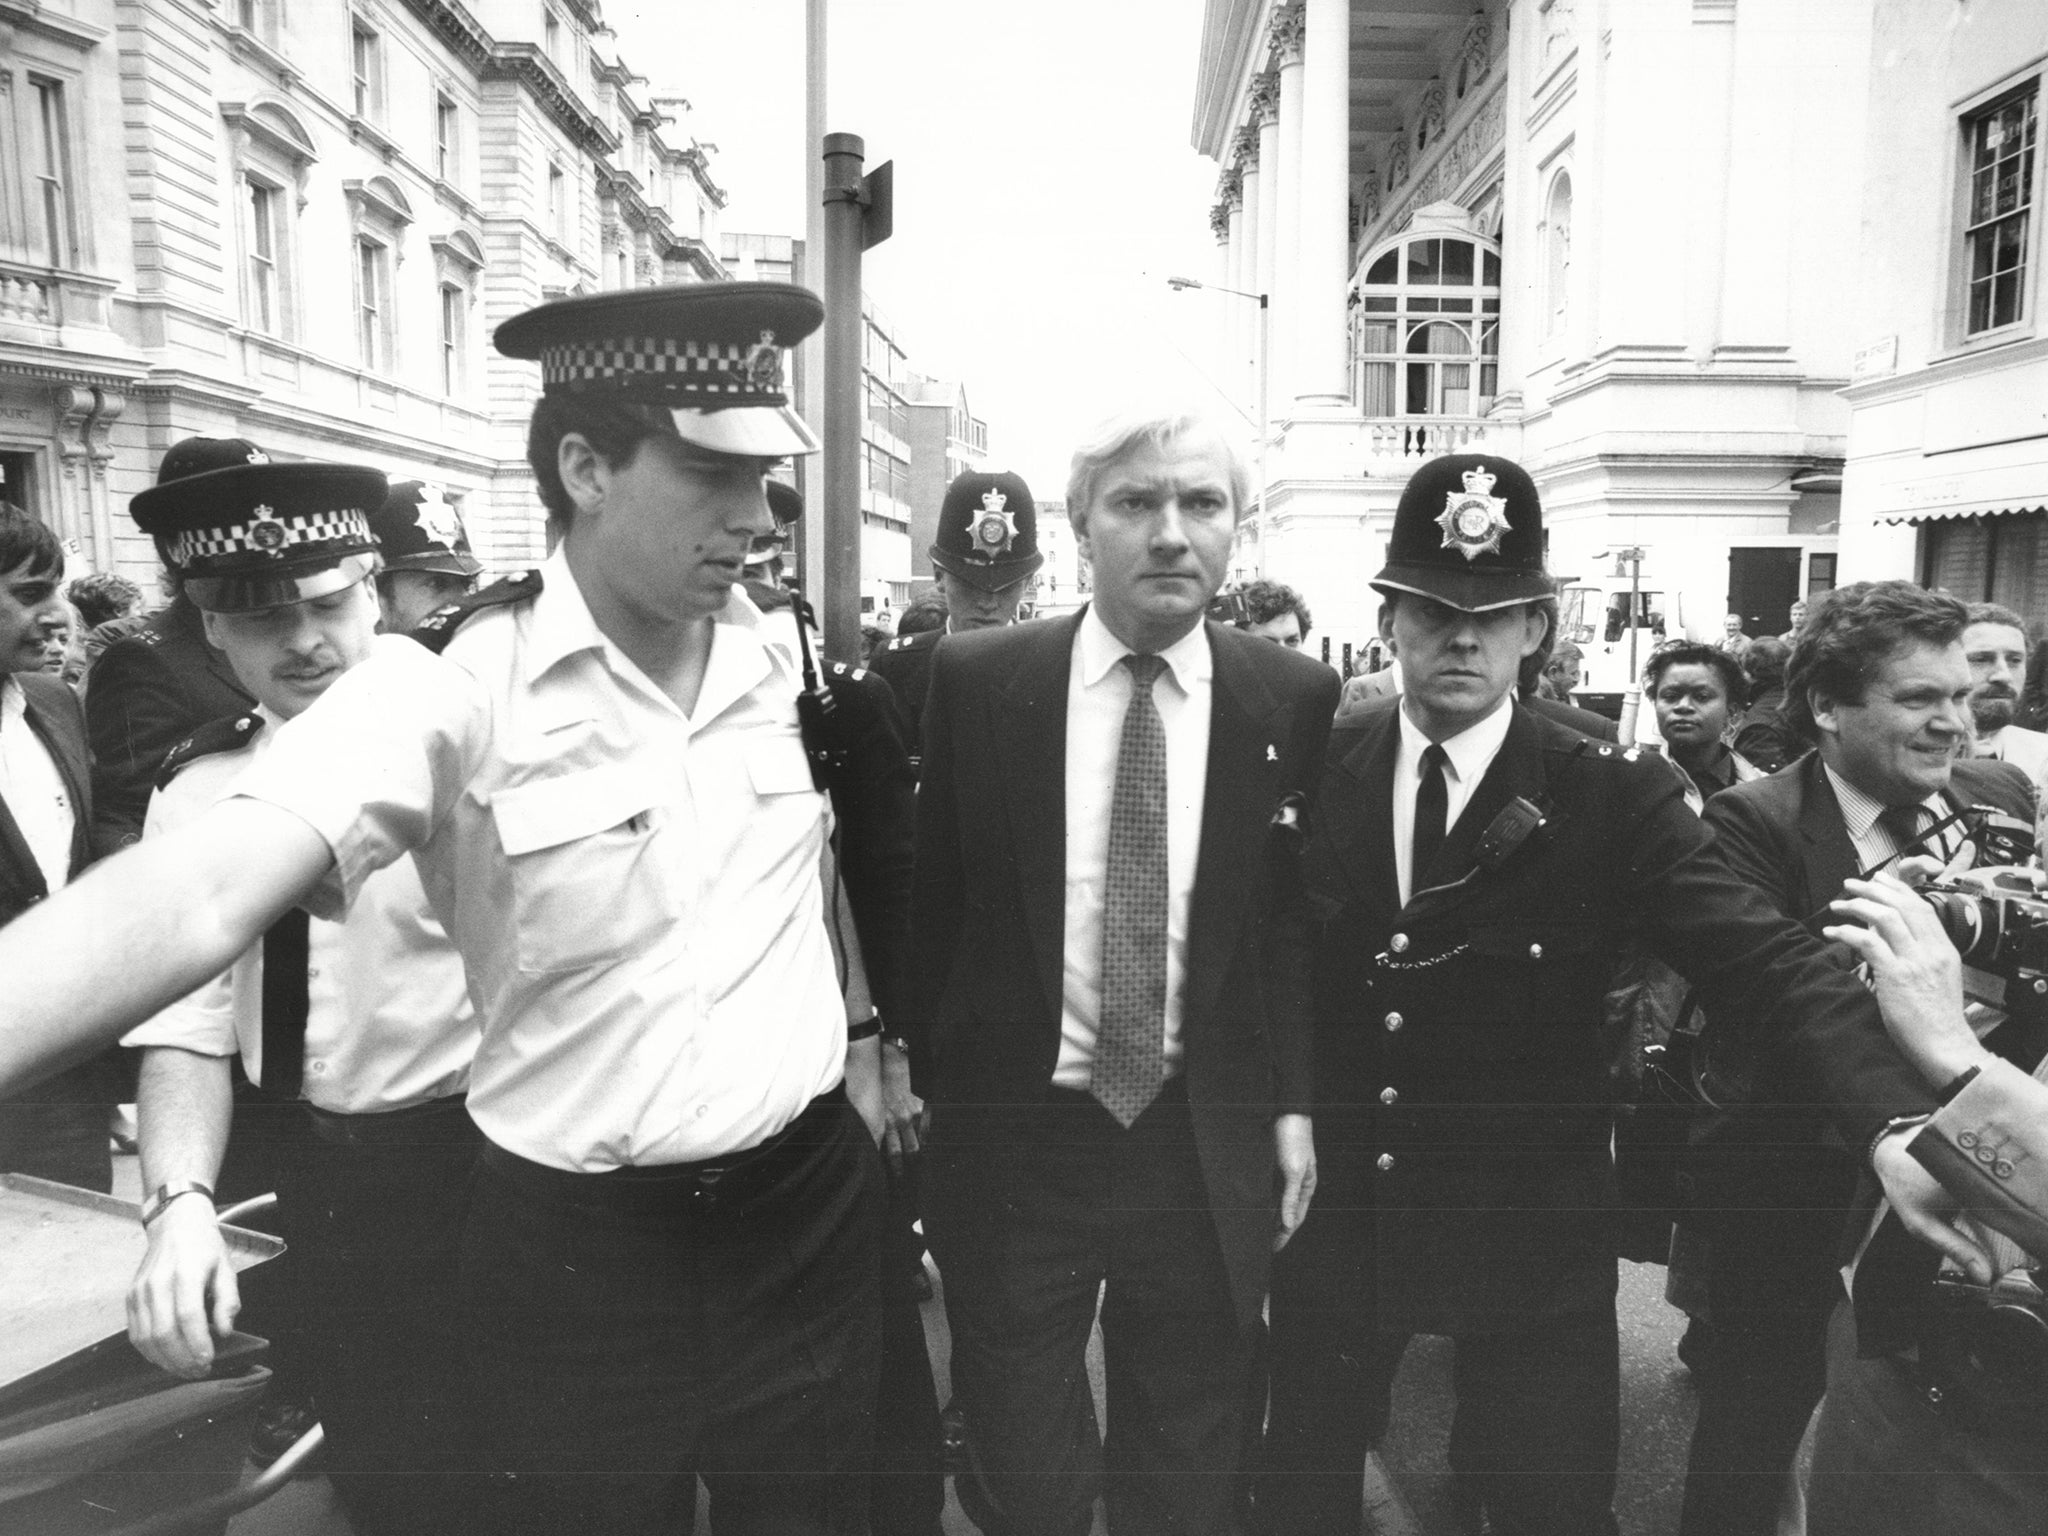 Harvey Proctor, then MP for Billericay, on his way to court in 1987